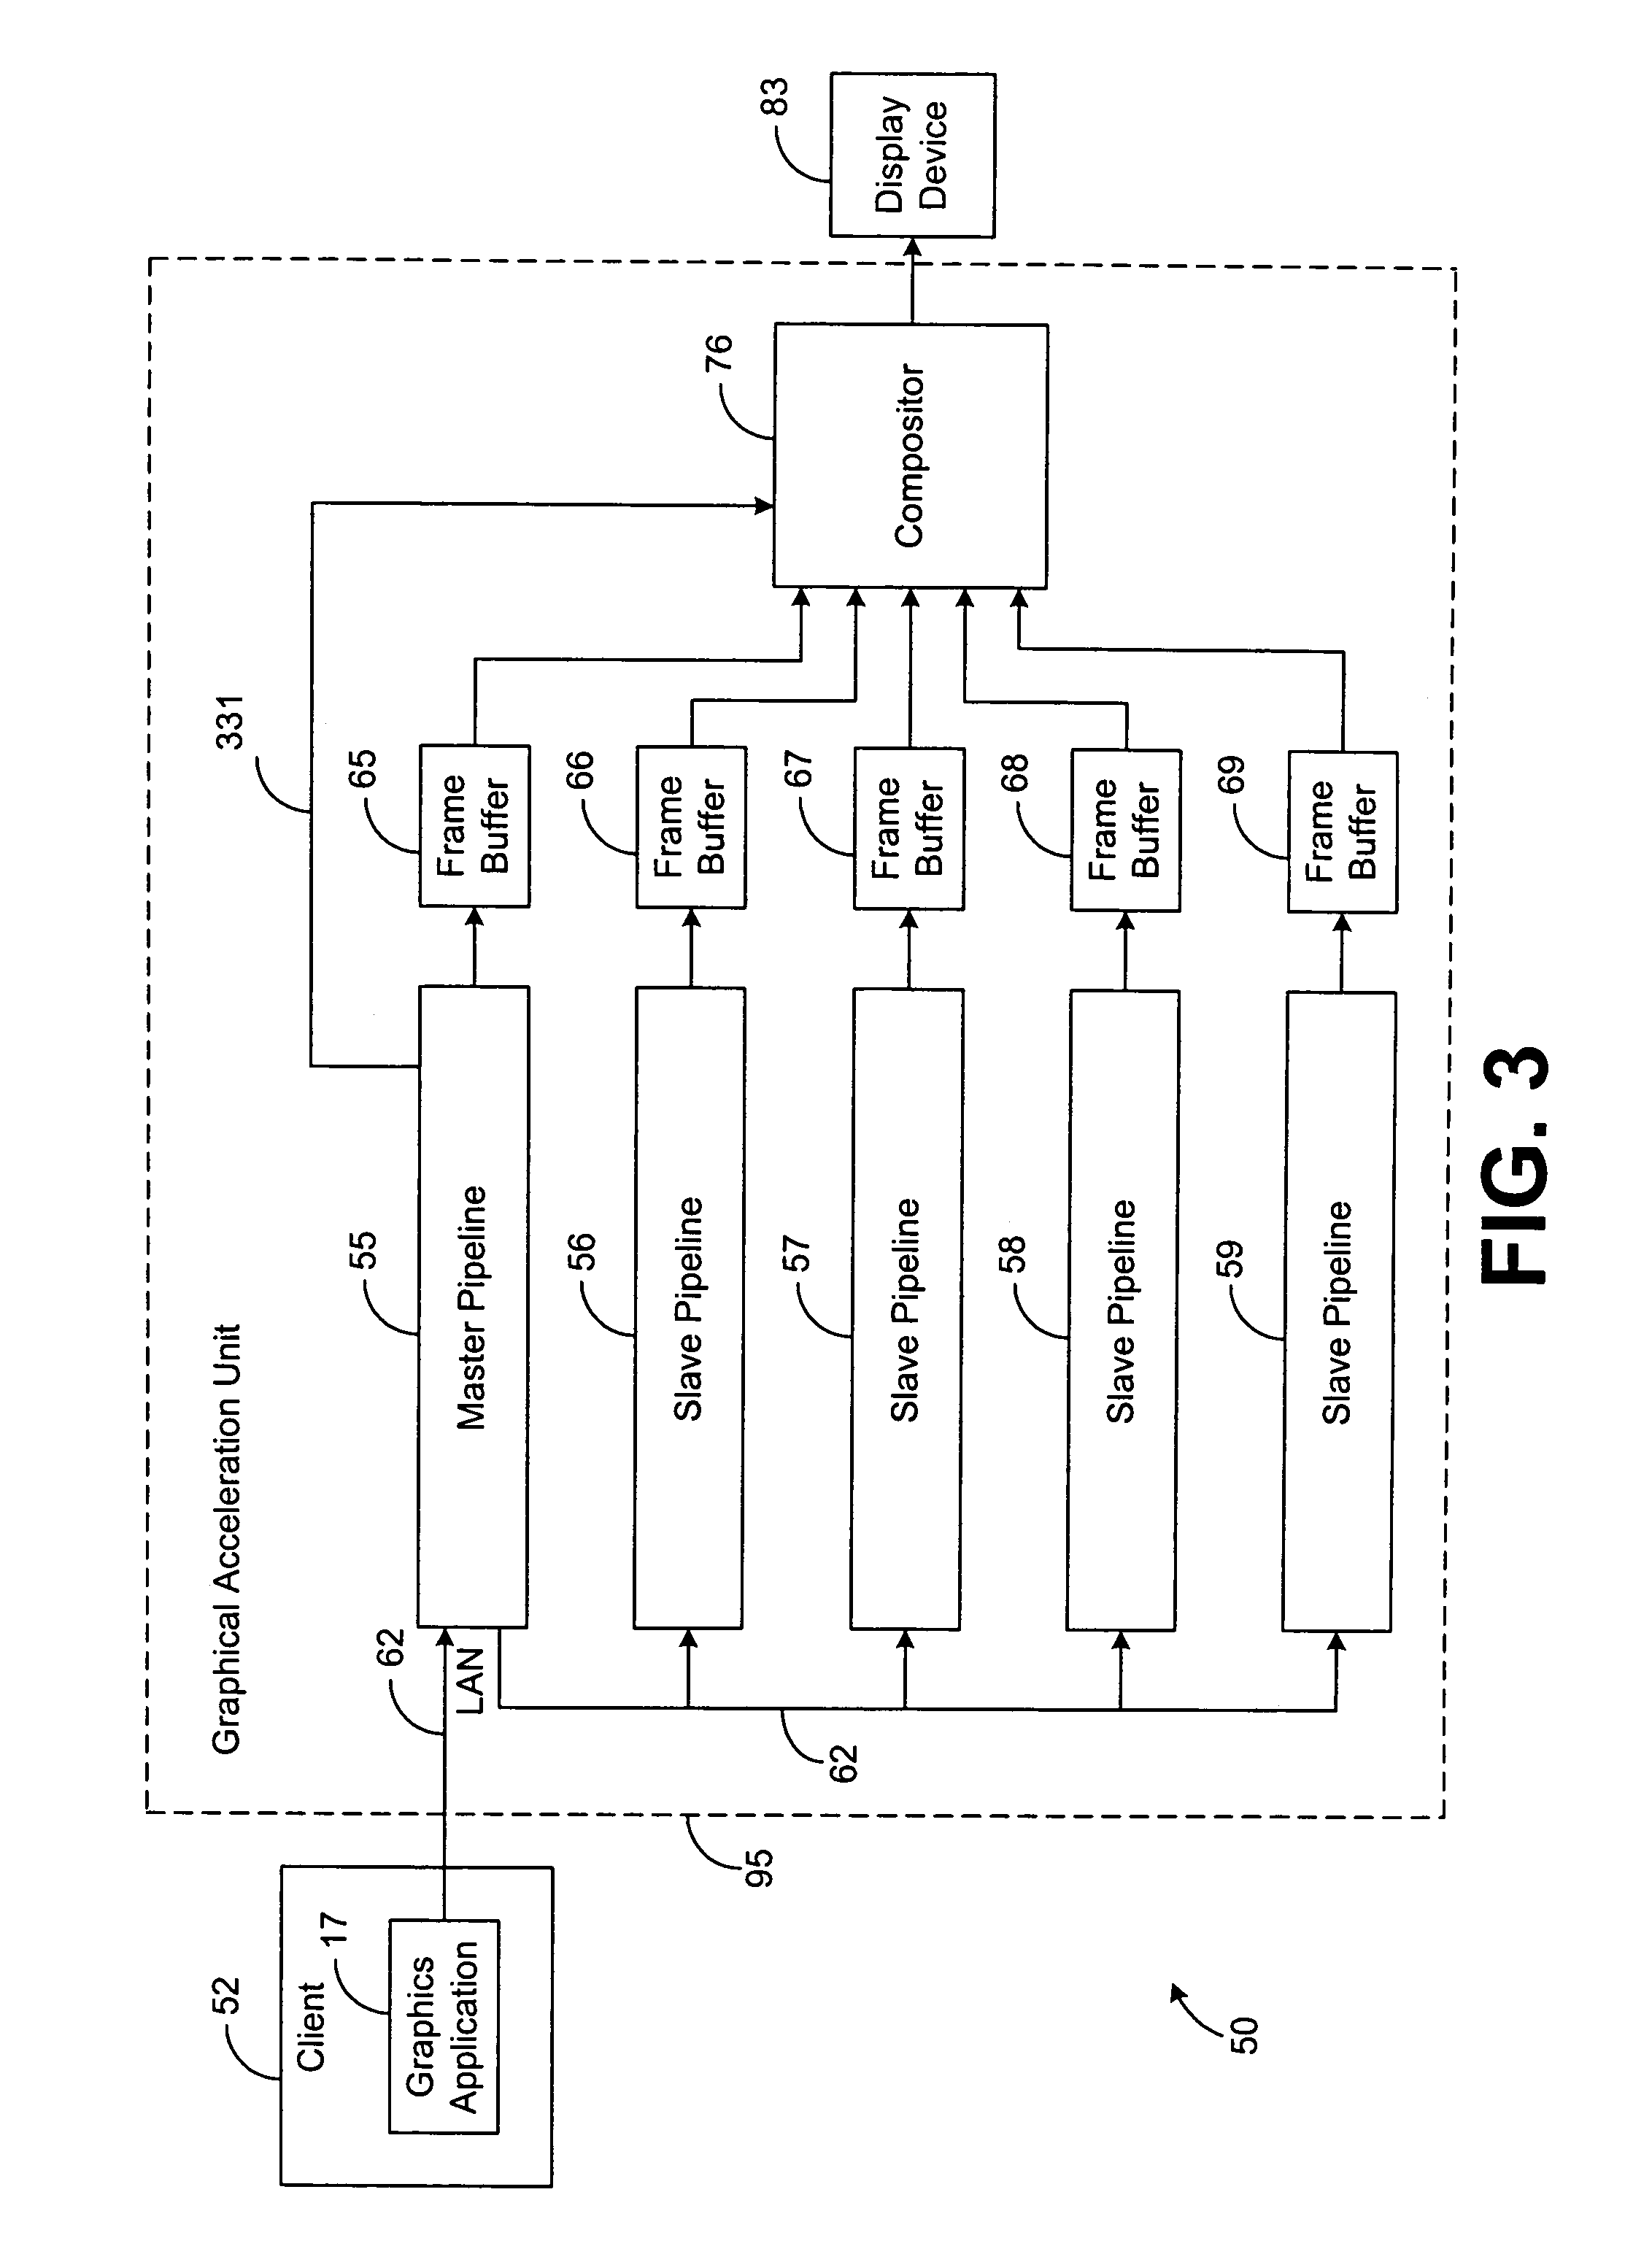 Systems and methods for rendering active stereo graphical data as passive stereo